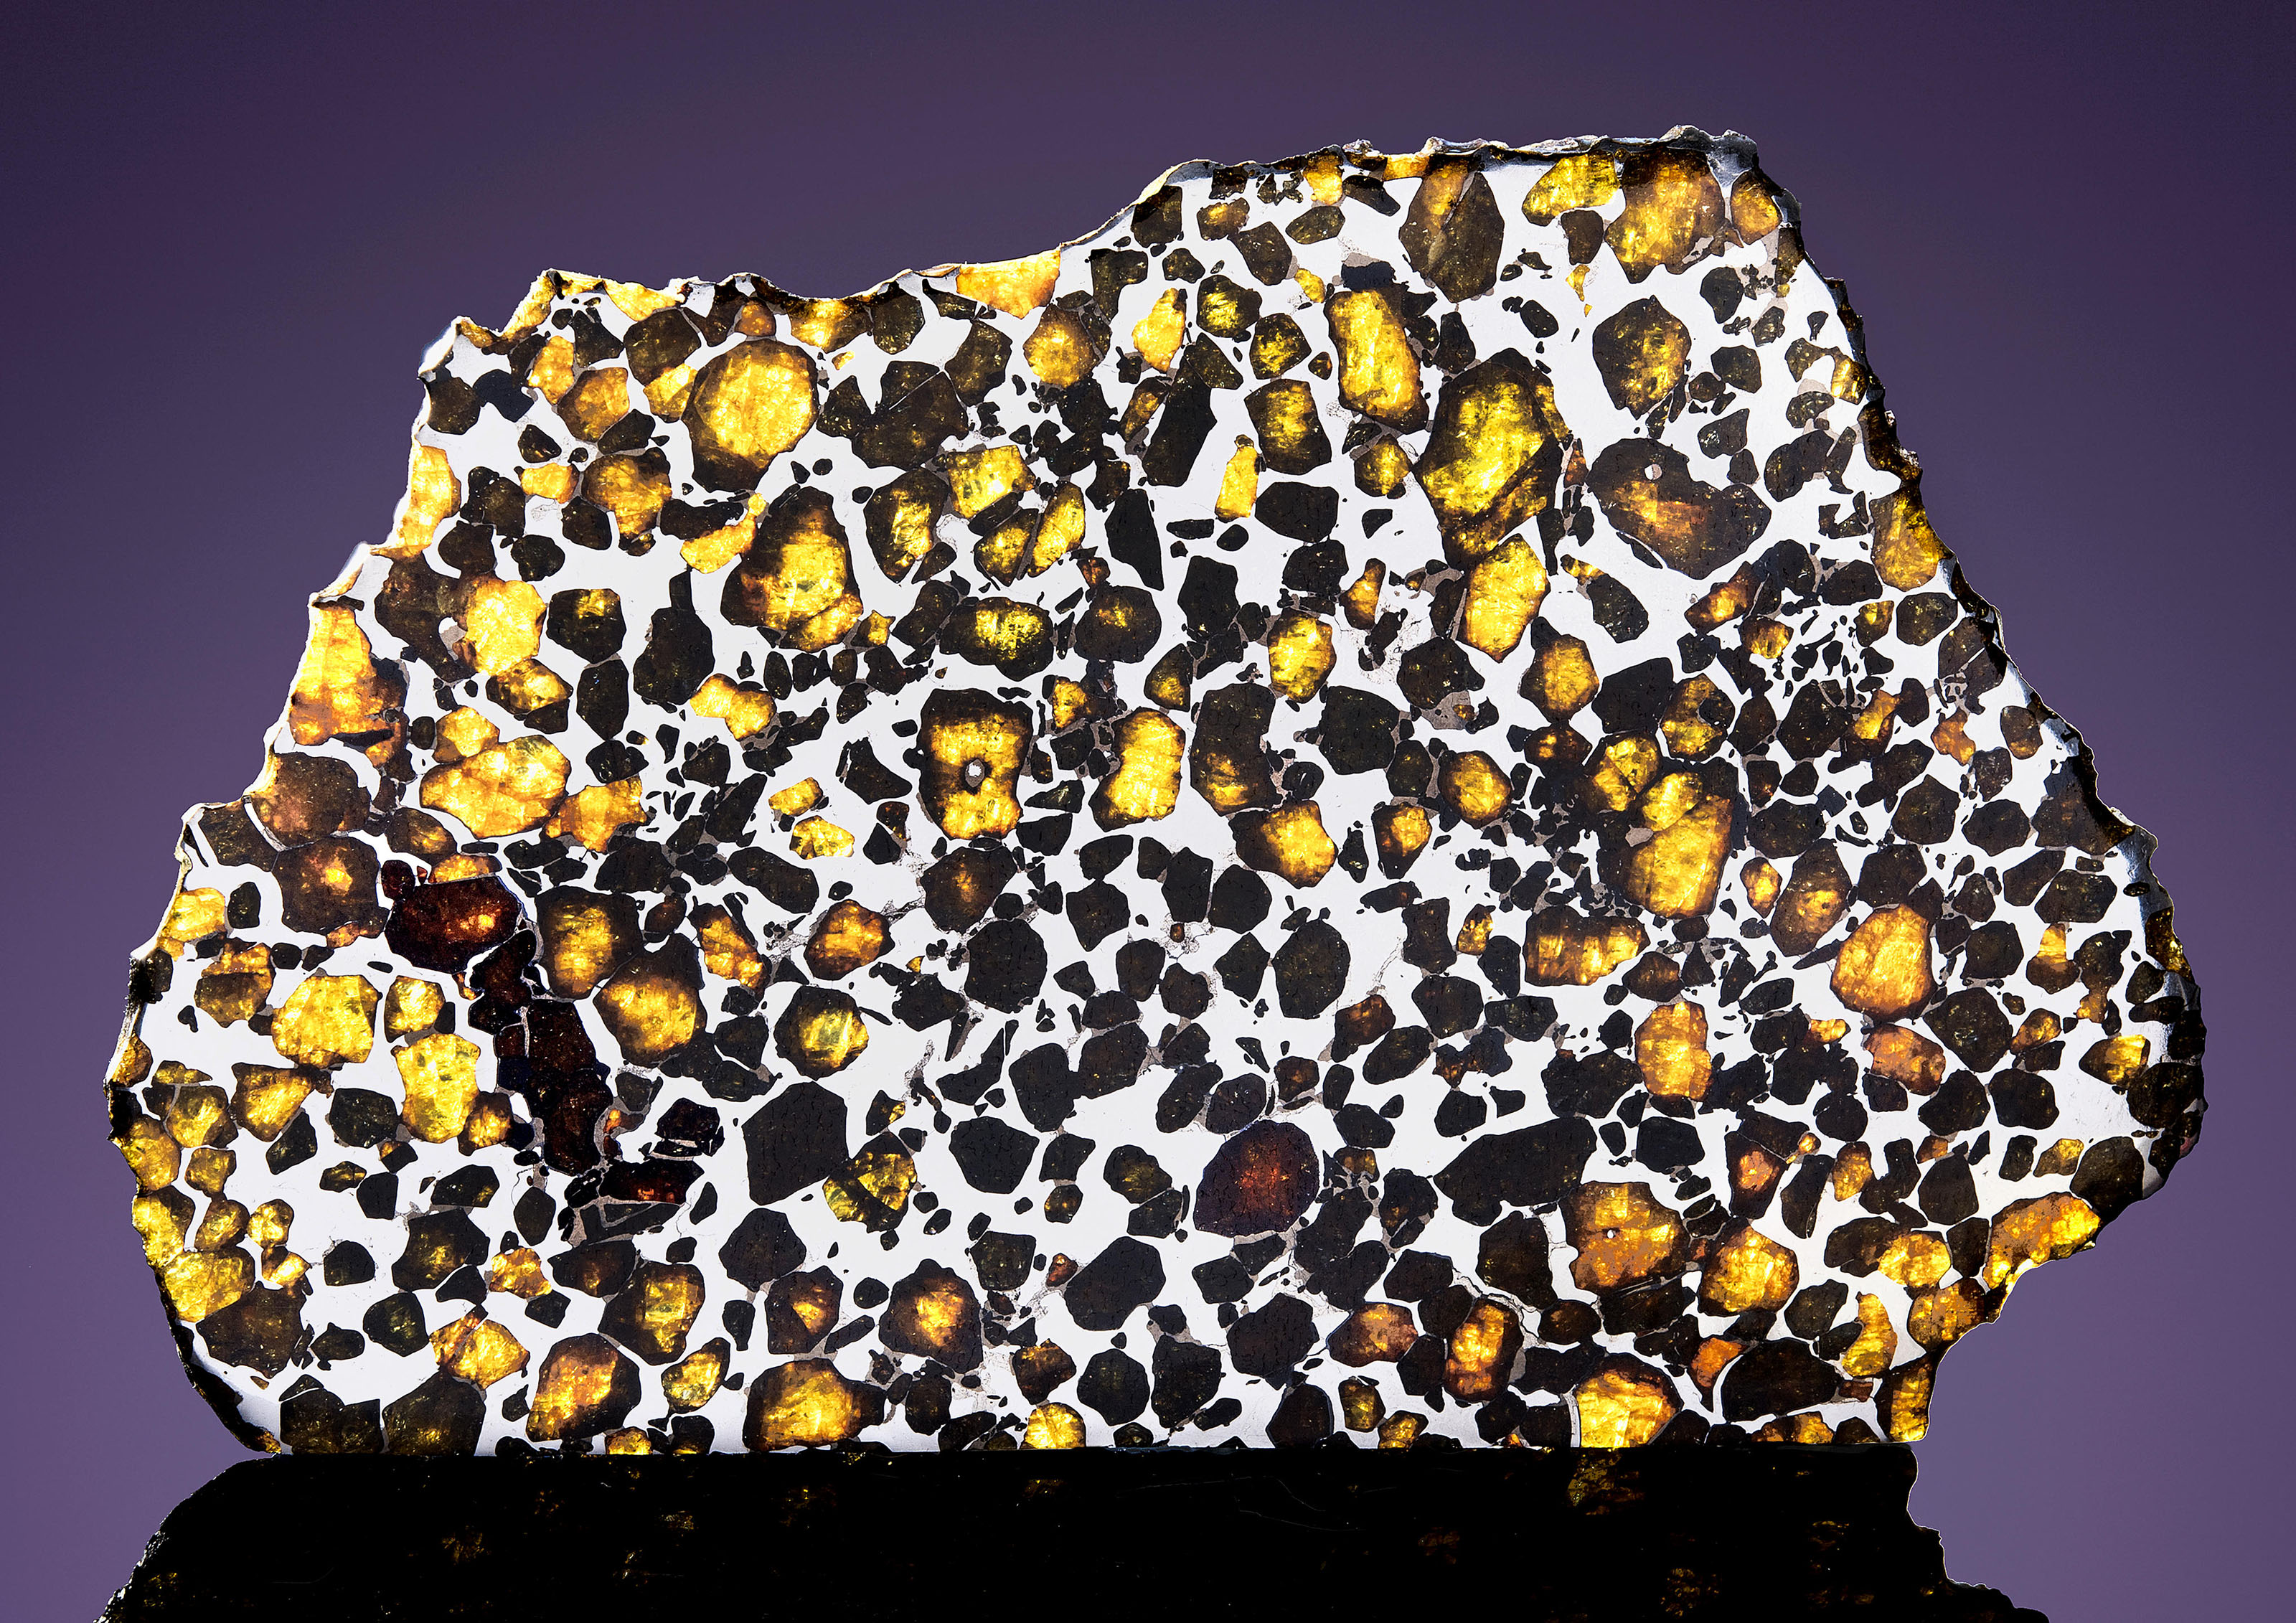 IMILAC PALLASITE PARTIAL SLICE — THE MOST BEAUTIFUL EXTRATERRESTRIAL ...